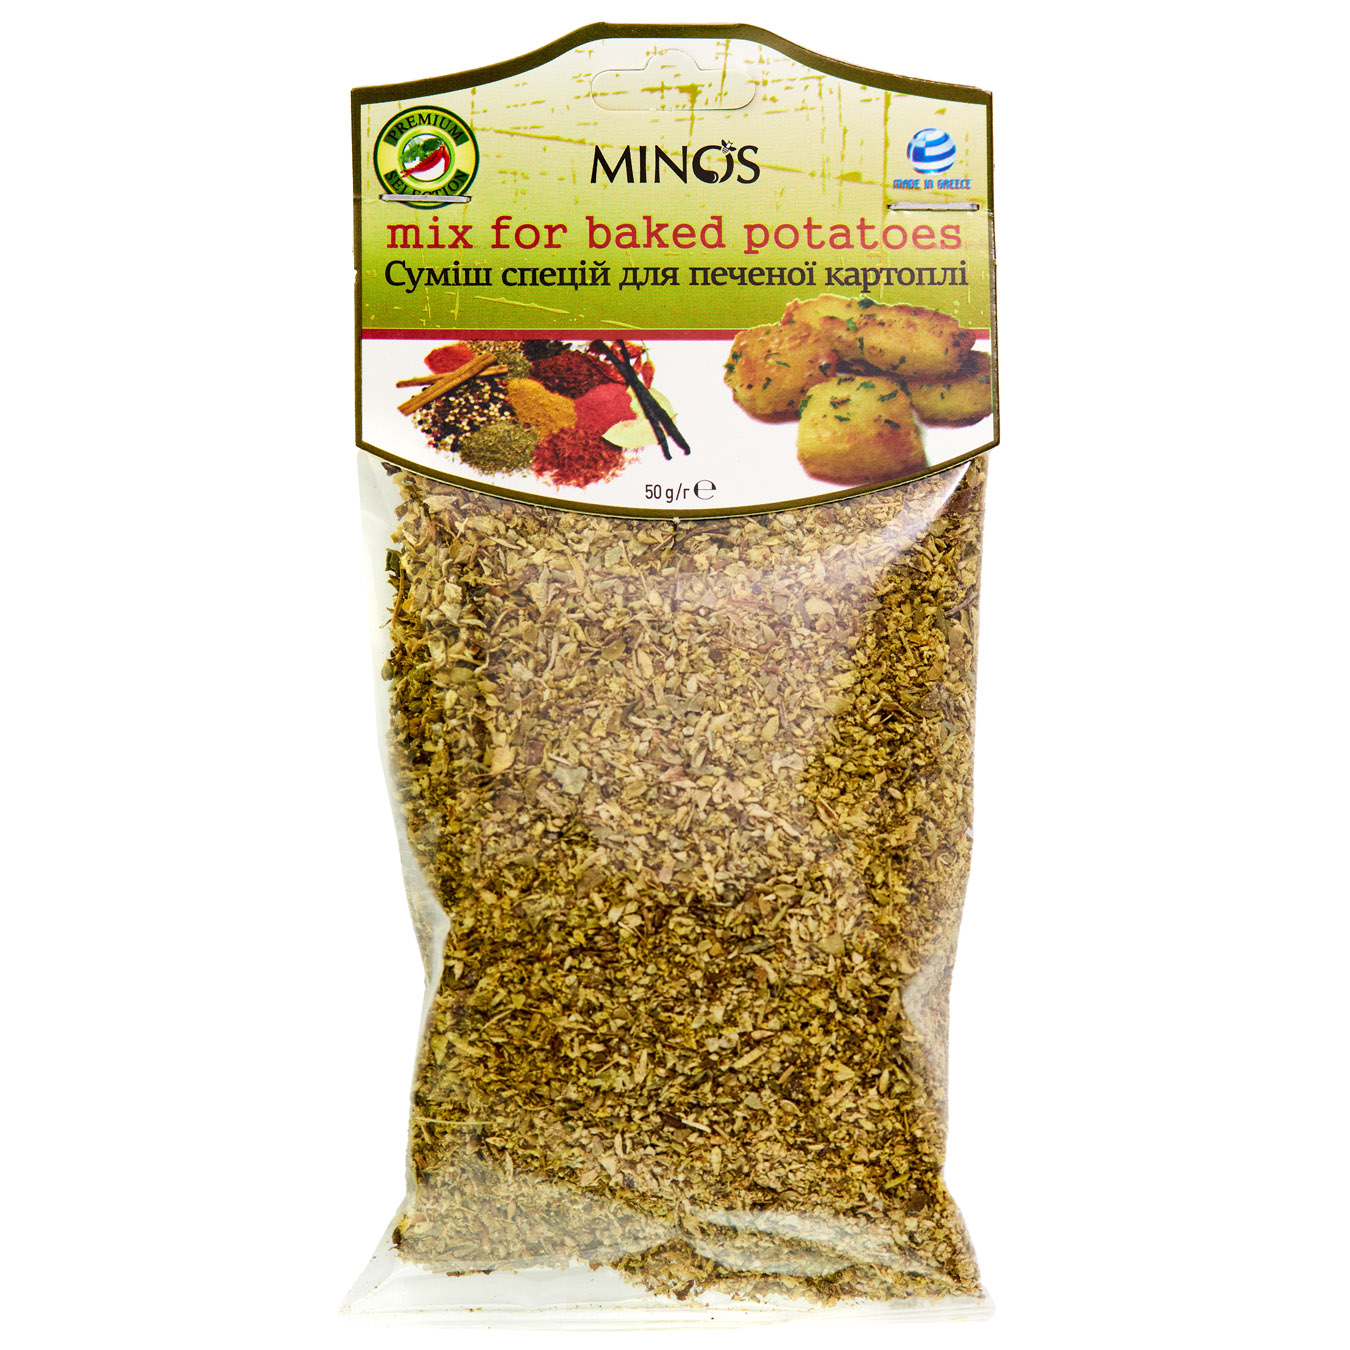 Minos For Baked Potatoes Spices Mix 50g